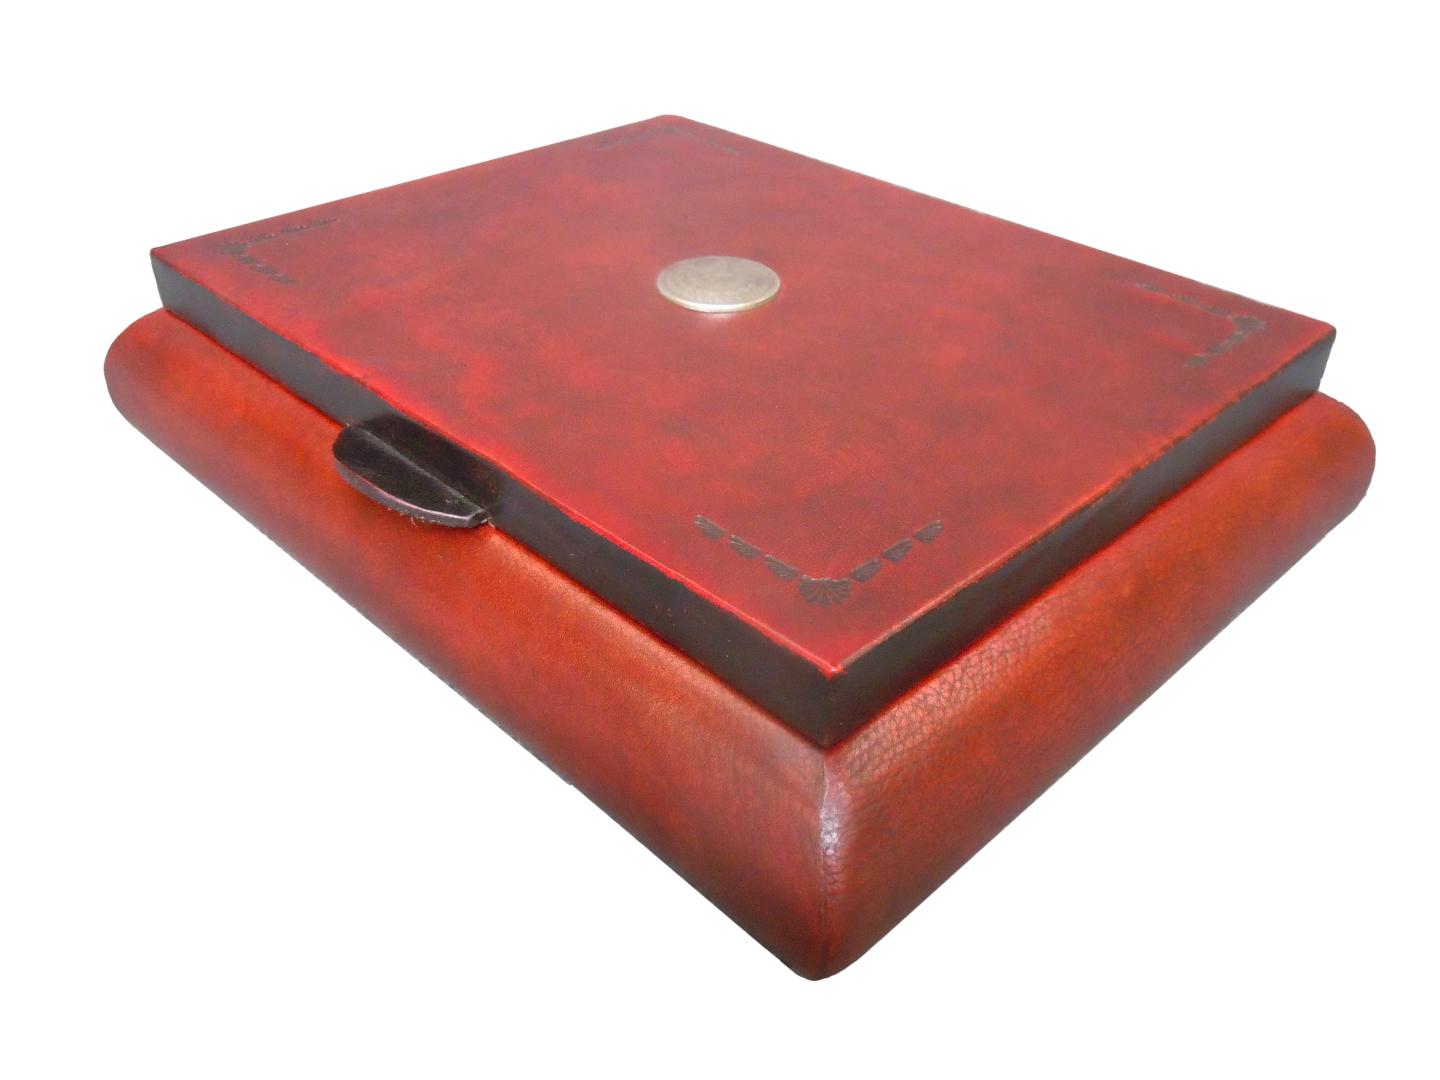 leather box with beautiful concho/shell design on the top of the piece